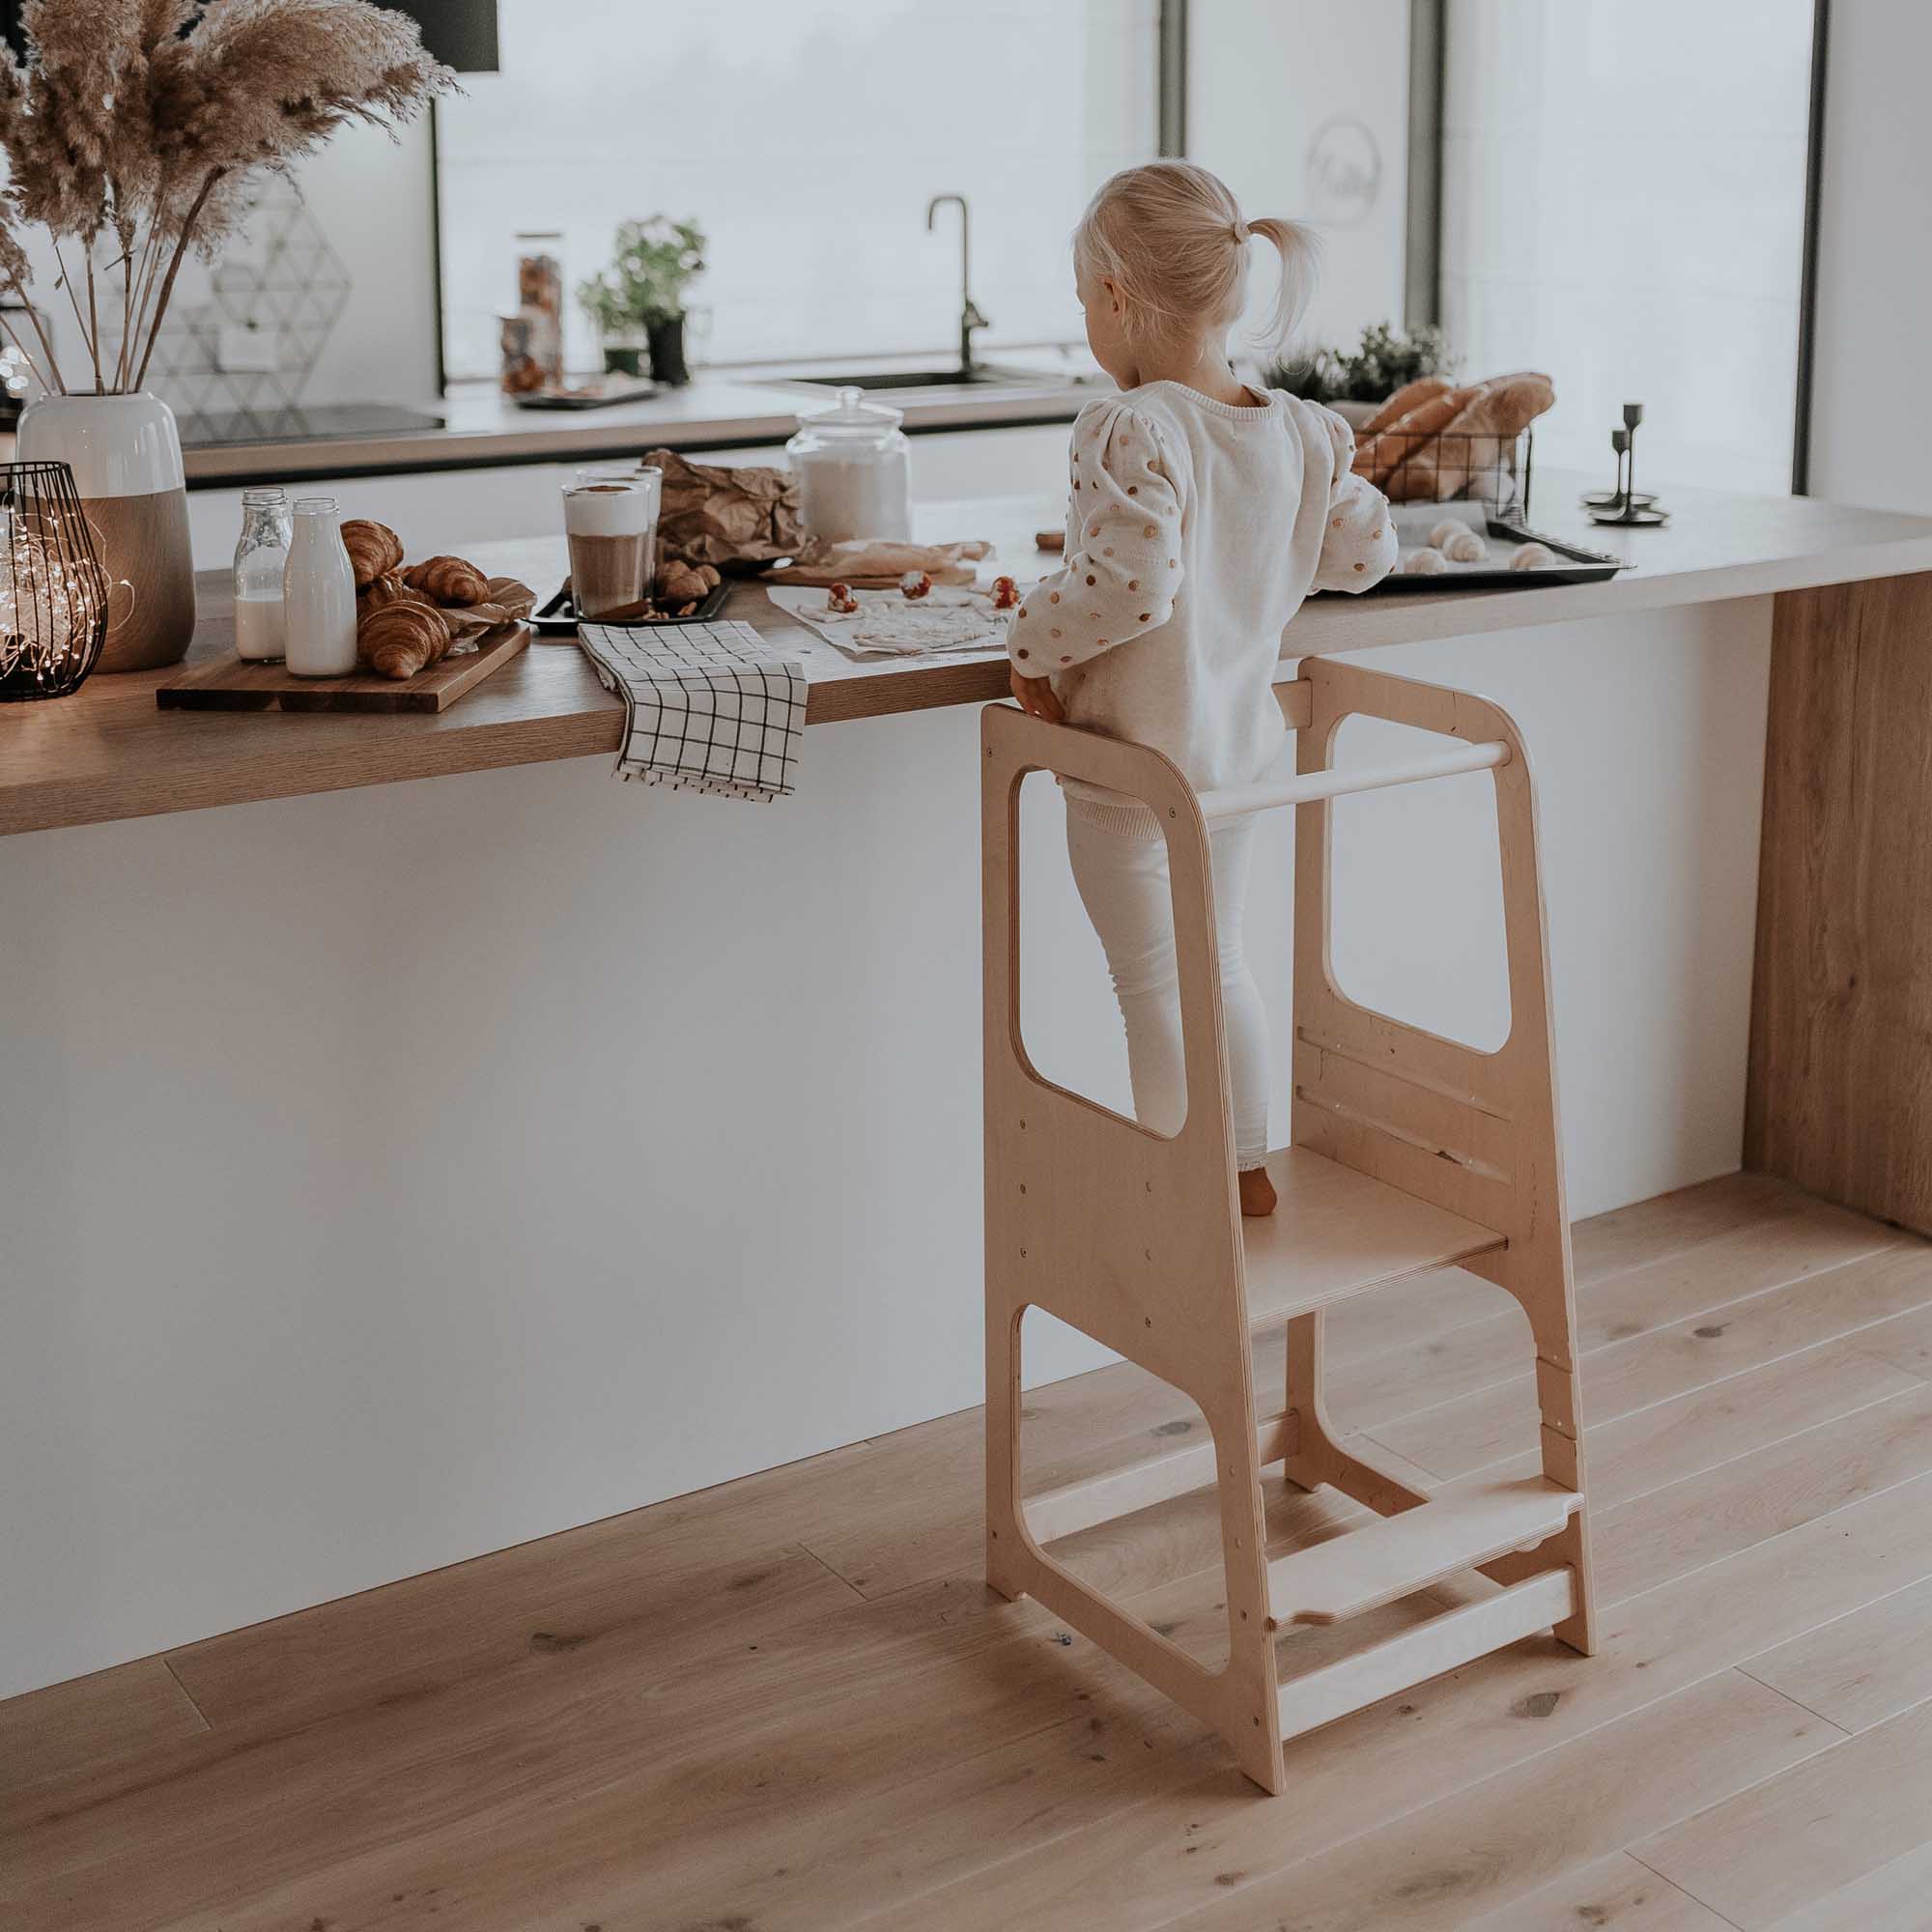 Toddler girl standing on a kids step stool in the kitchen